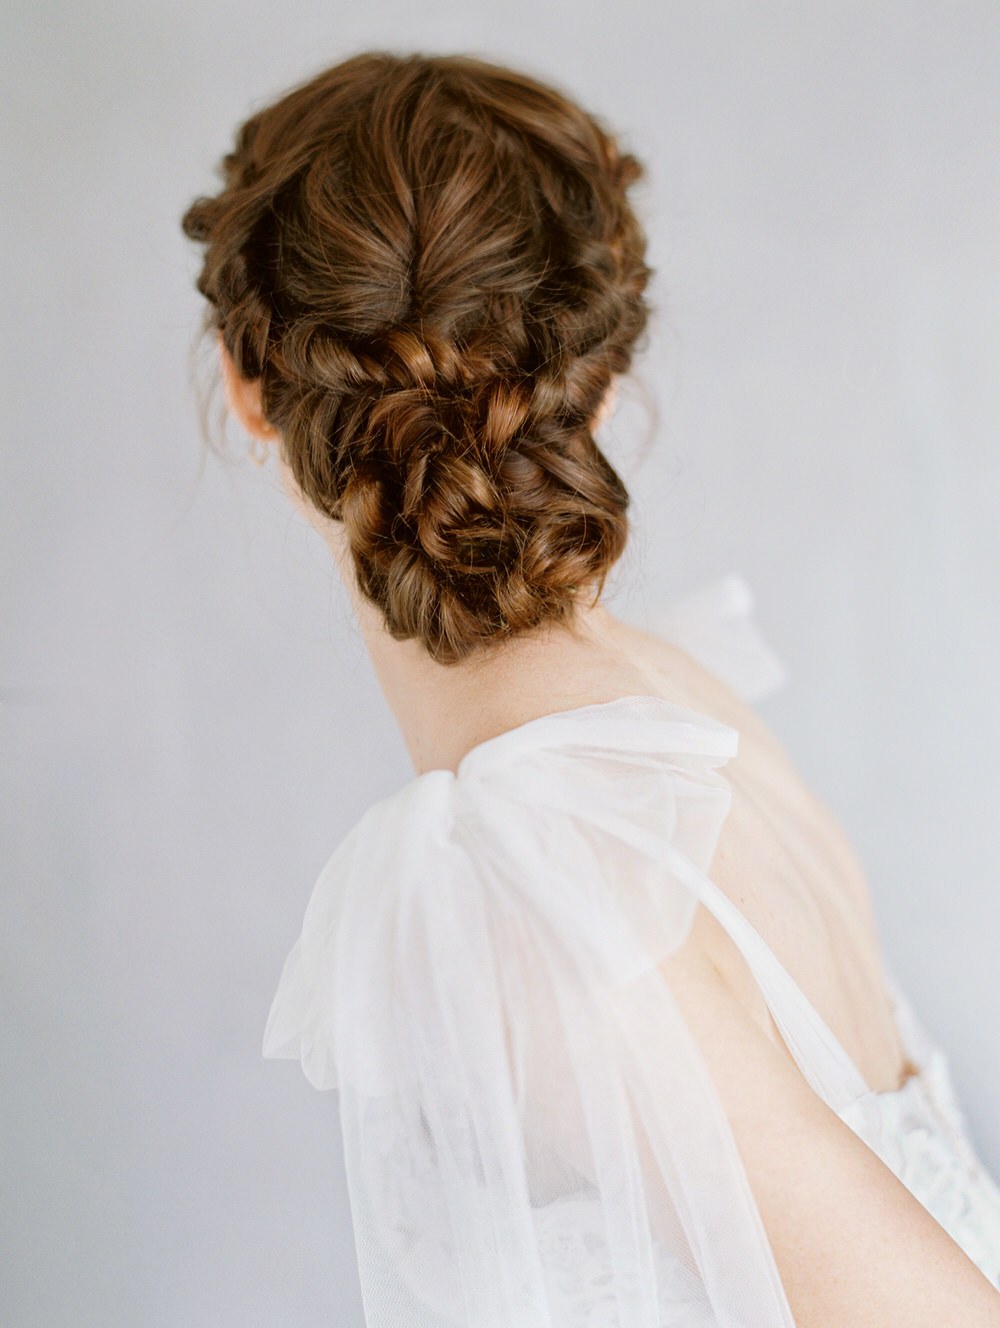 updo braided updo hairstyle,simple updo, swept back bridal hairstyle,updo  hairstyles ,wedding hairstyles #w… | Braided hairstyles updo, Hair styles,  Chic hairstyles